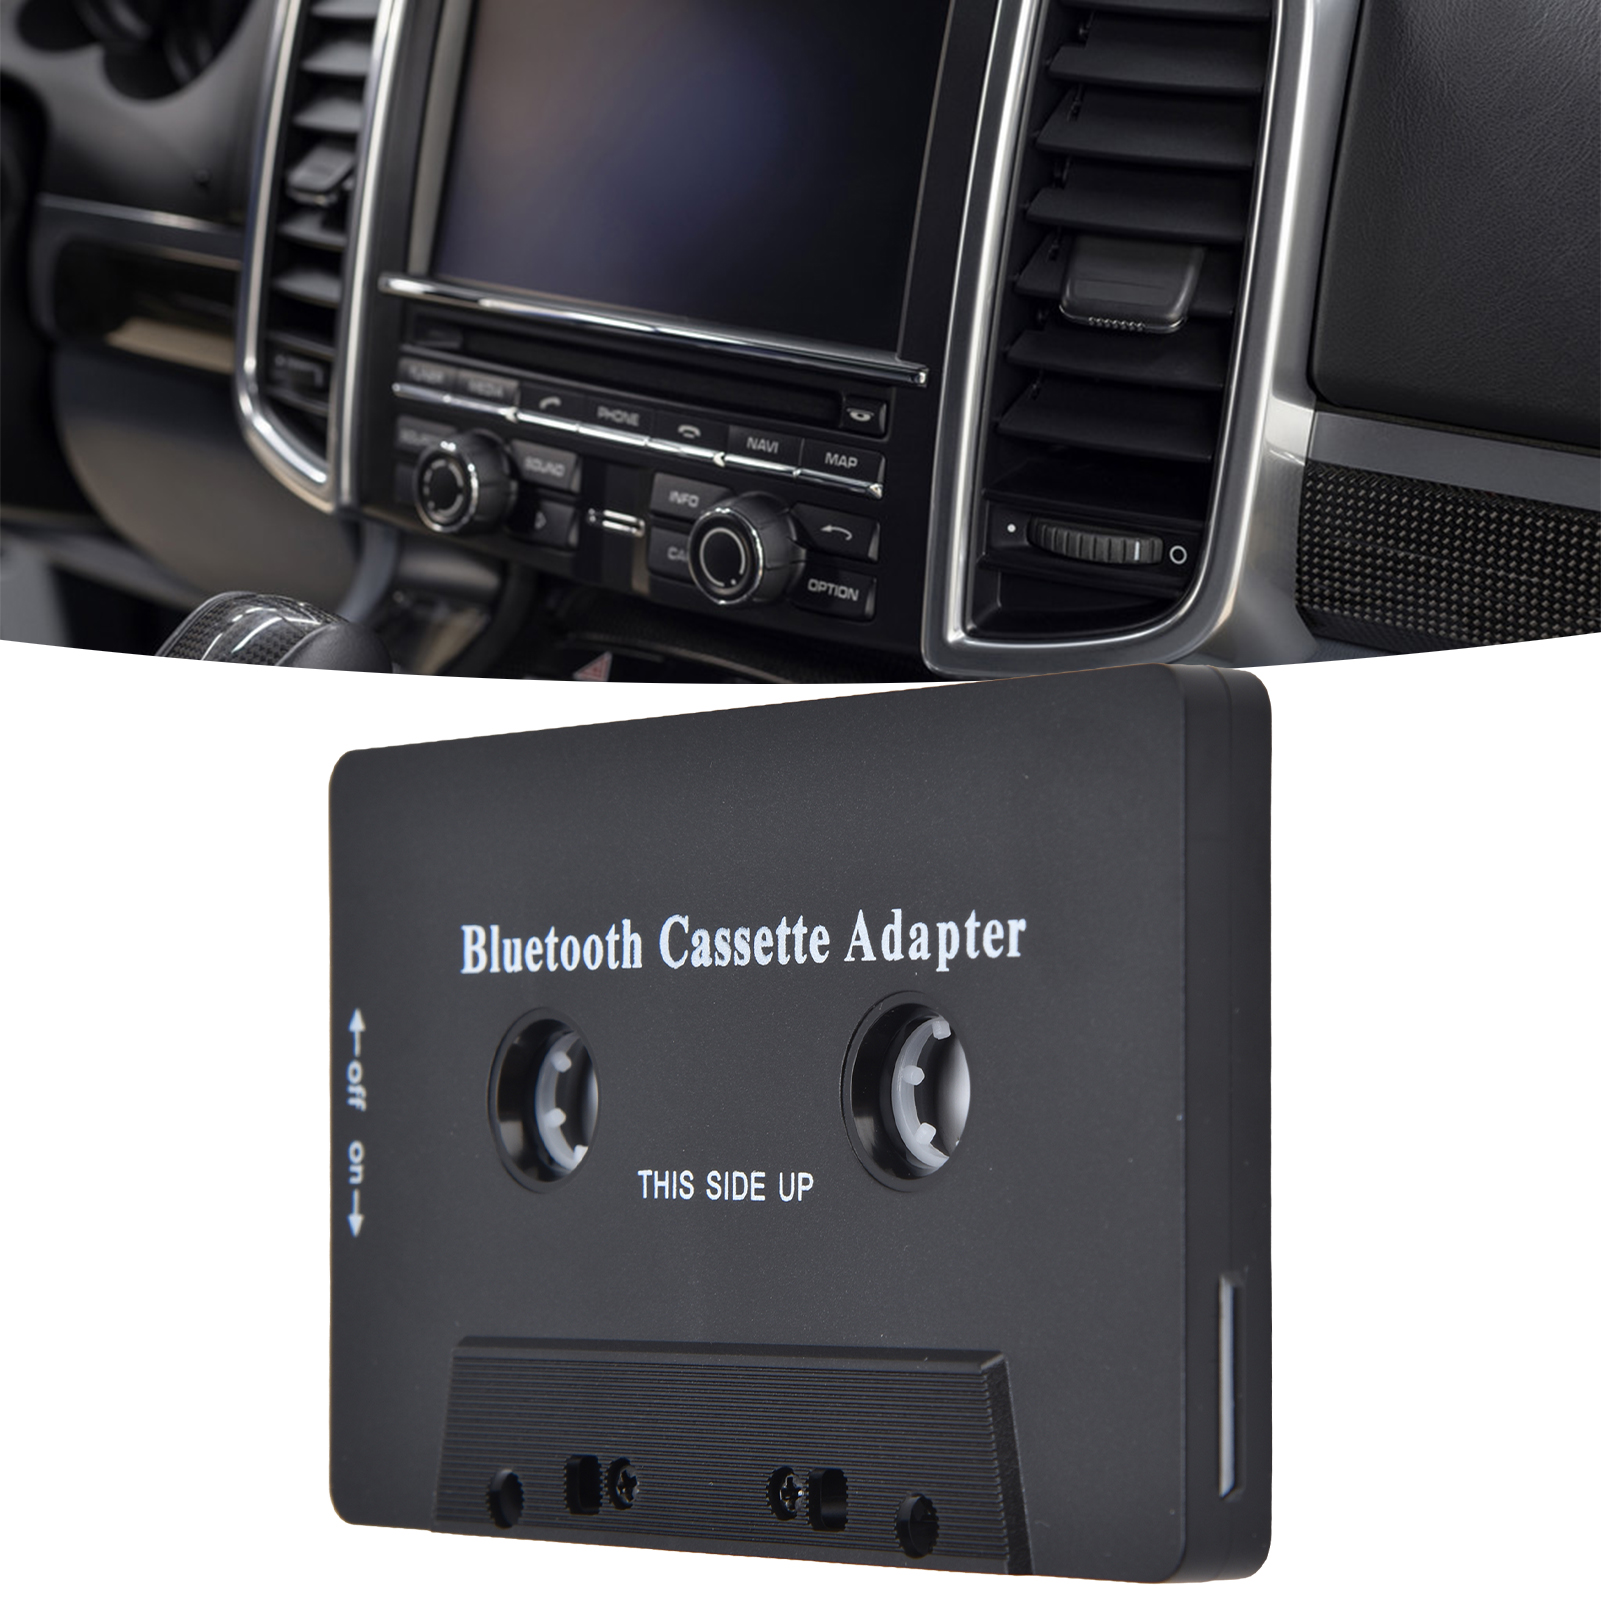 Car Tape Converter Car Audio Bluetooth Wireless Cassette Receiver, Tape  Player Bluetooth 5.0 Cassette Aux Adapter Auxillary Cable Tape Adapter,  Black 